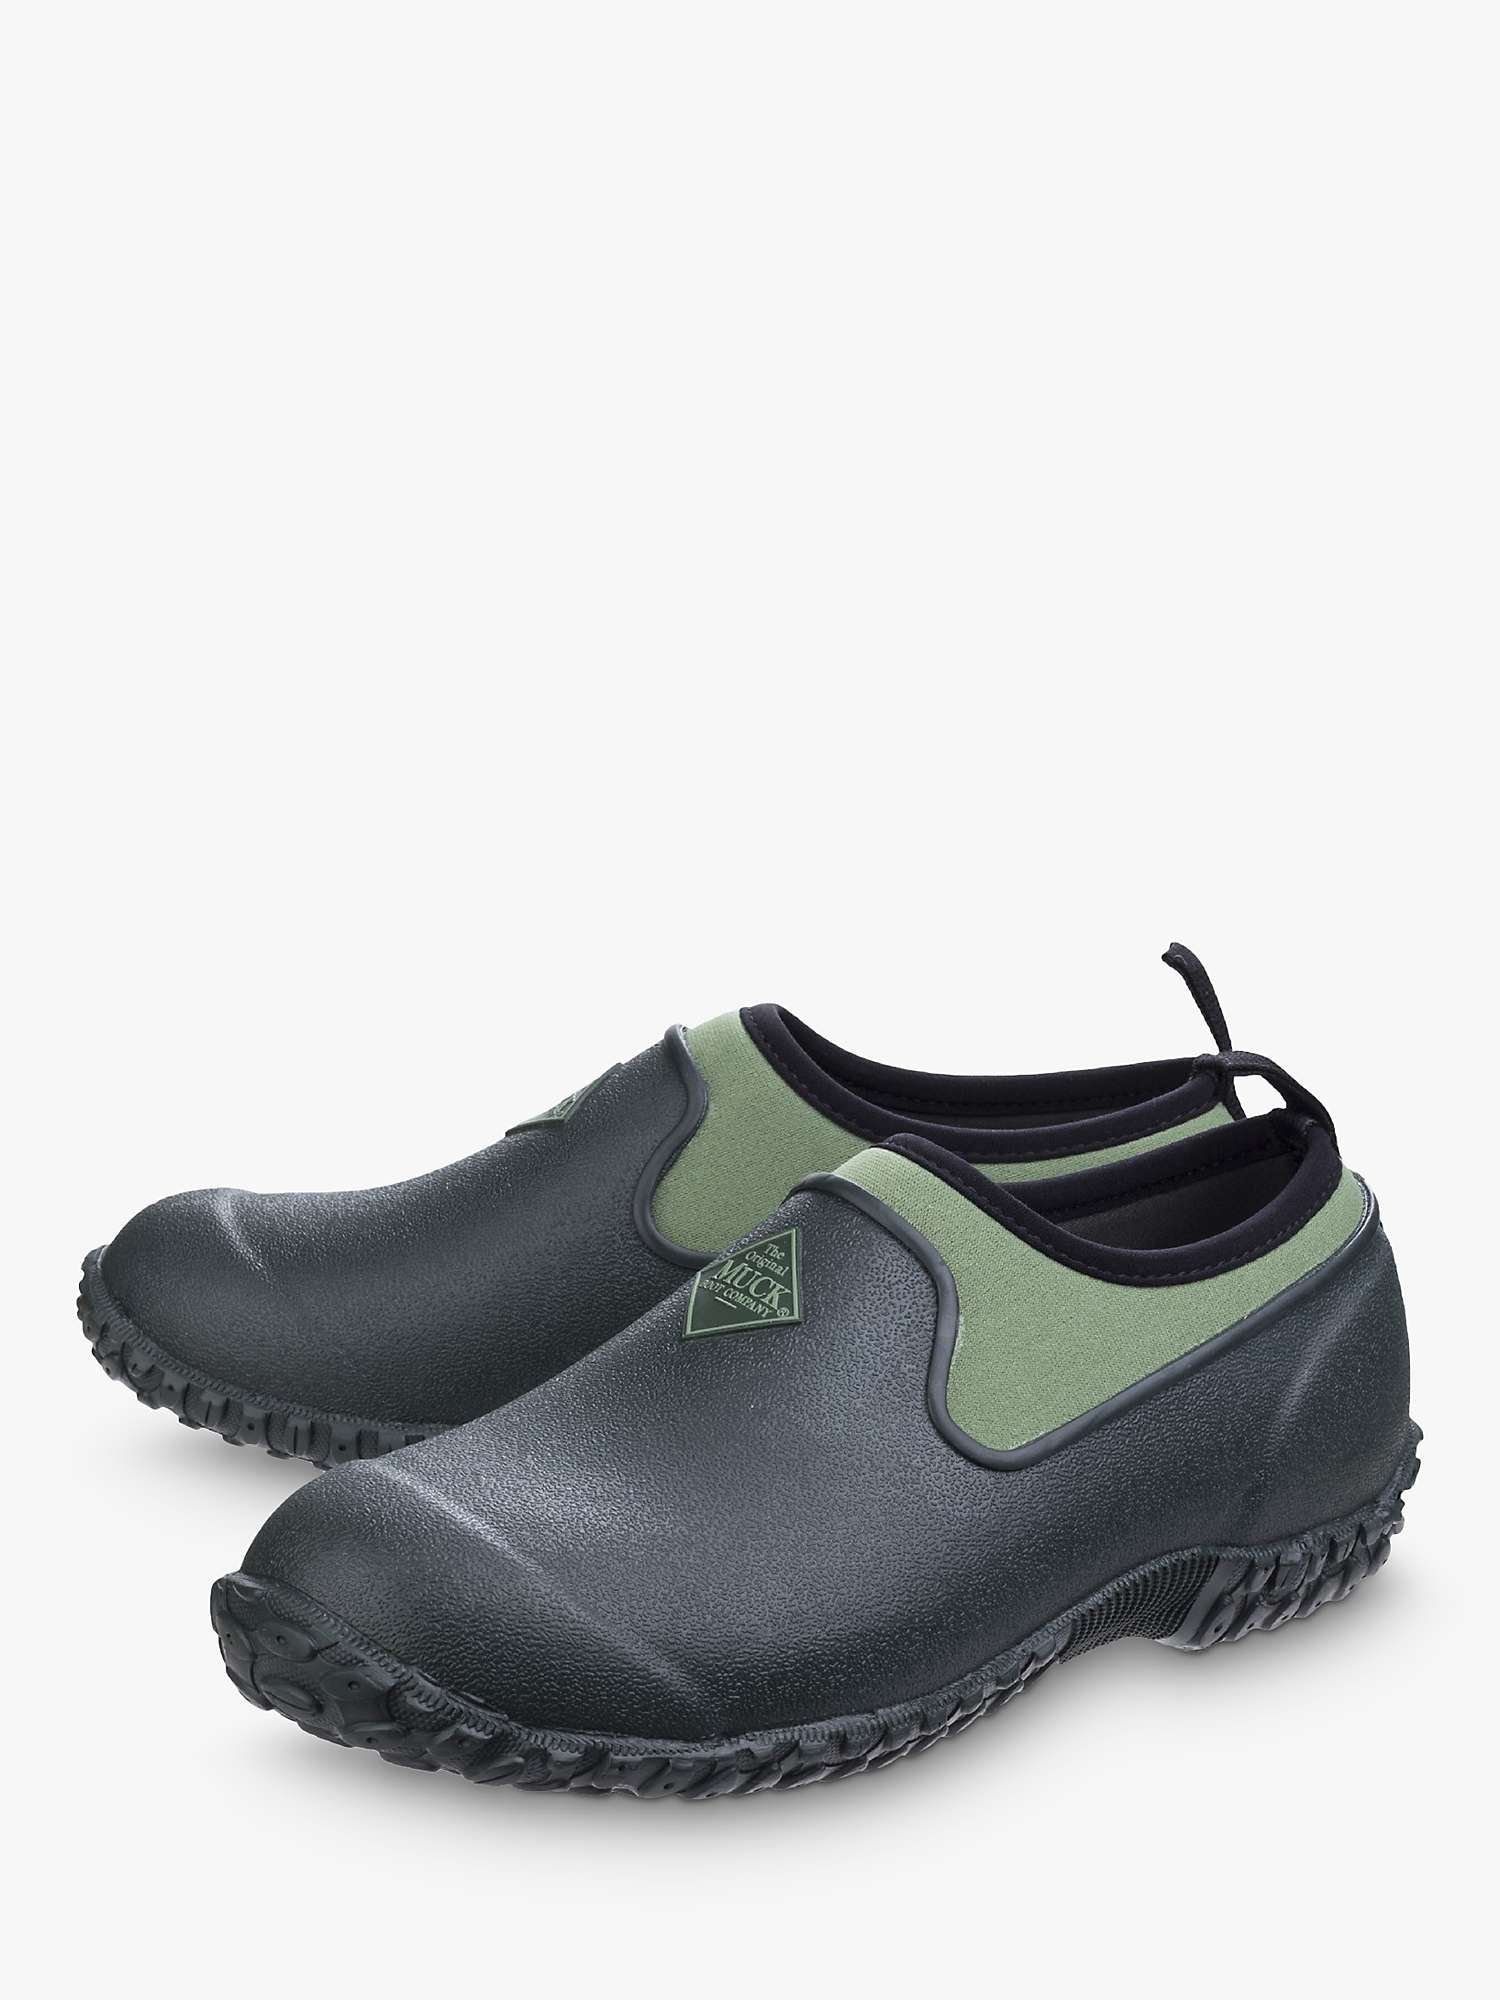 Buy Muck Muckster II Low All Purpose Shoe Boots, Green Online at johnlewis.com